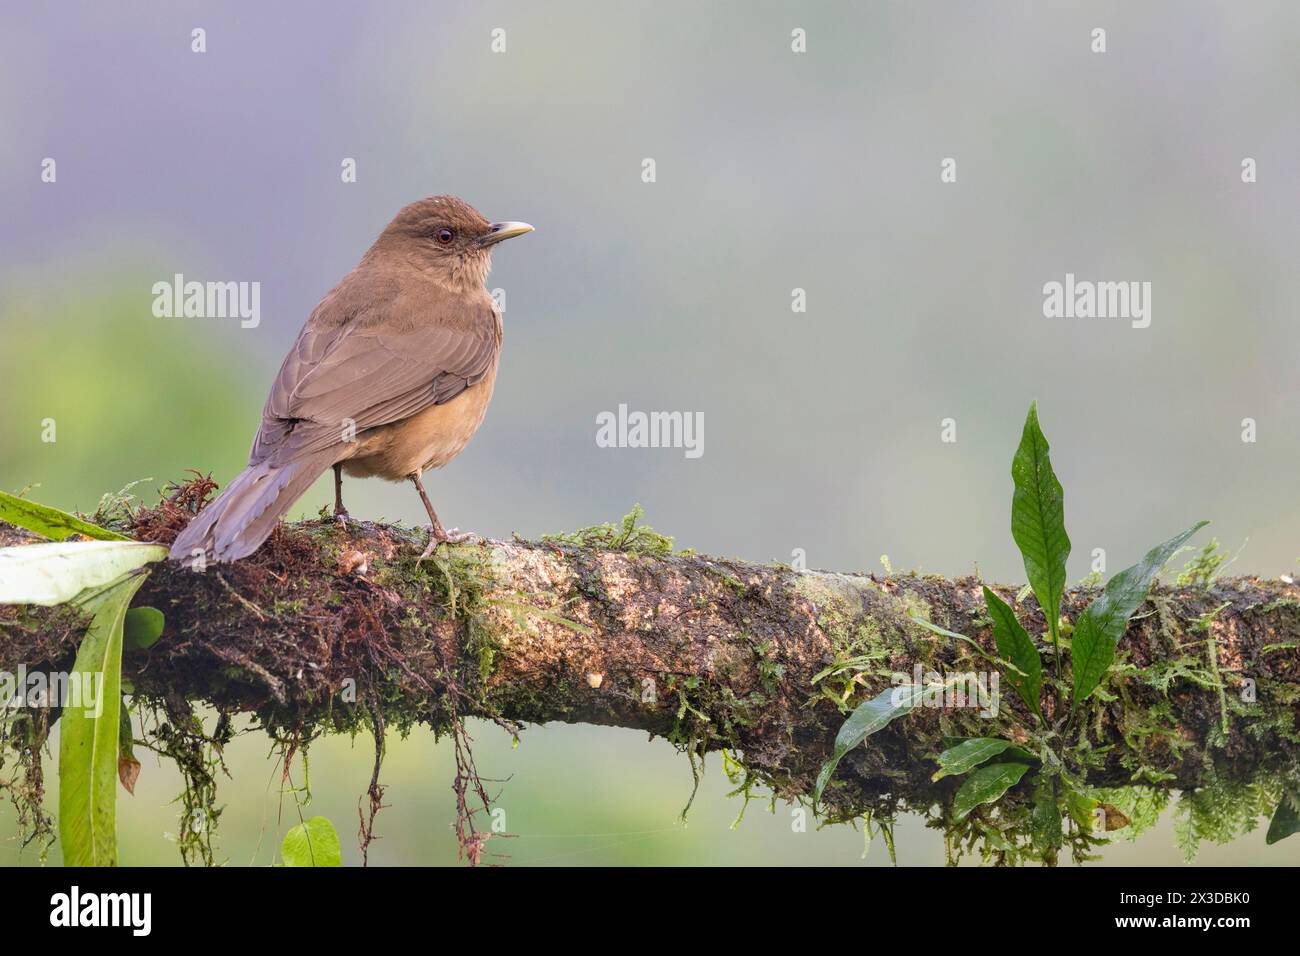 Clay-coloured thrush, Clay-colored robin (Turdus grayi), sits on a branch by the rainforest, Costa Rica, Boca Tapada Stock Photo